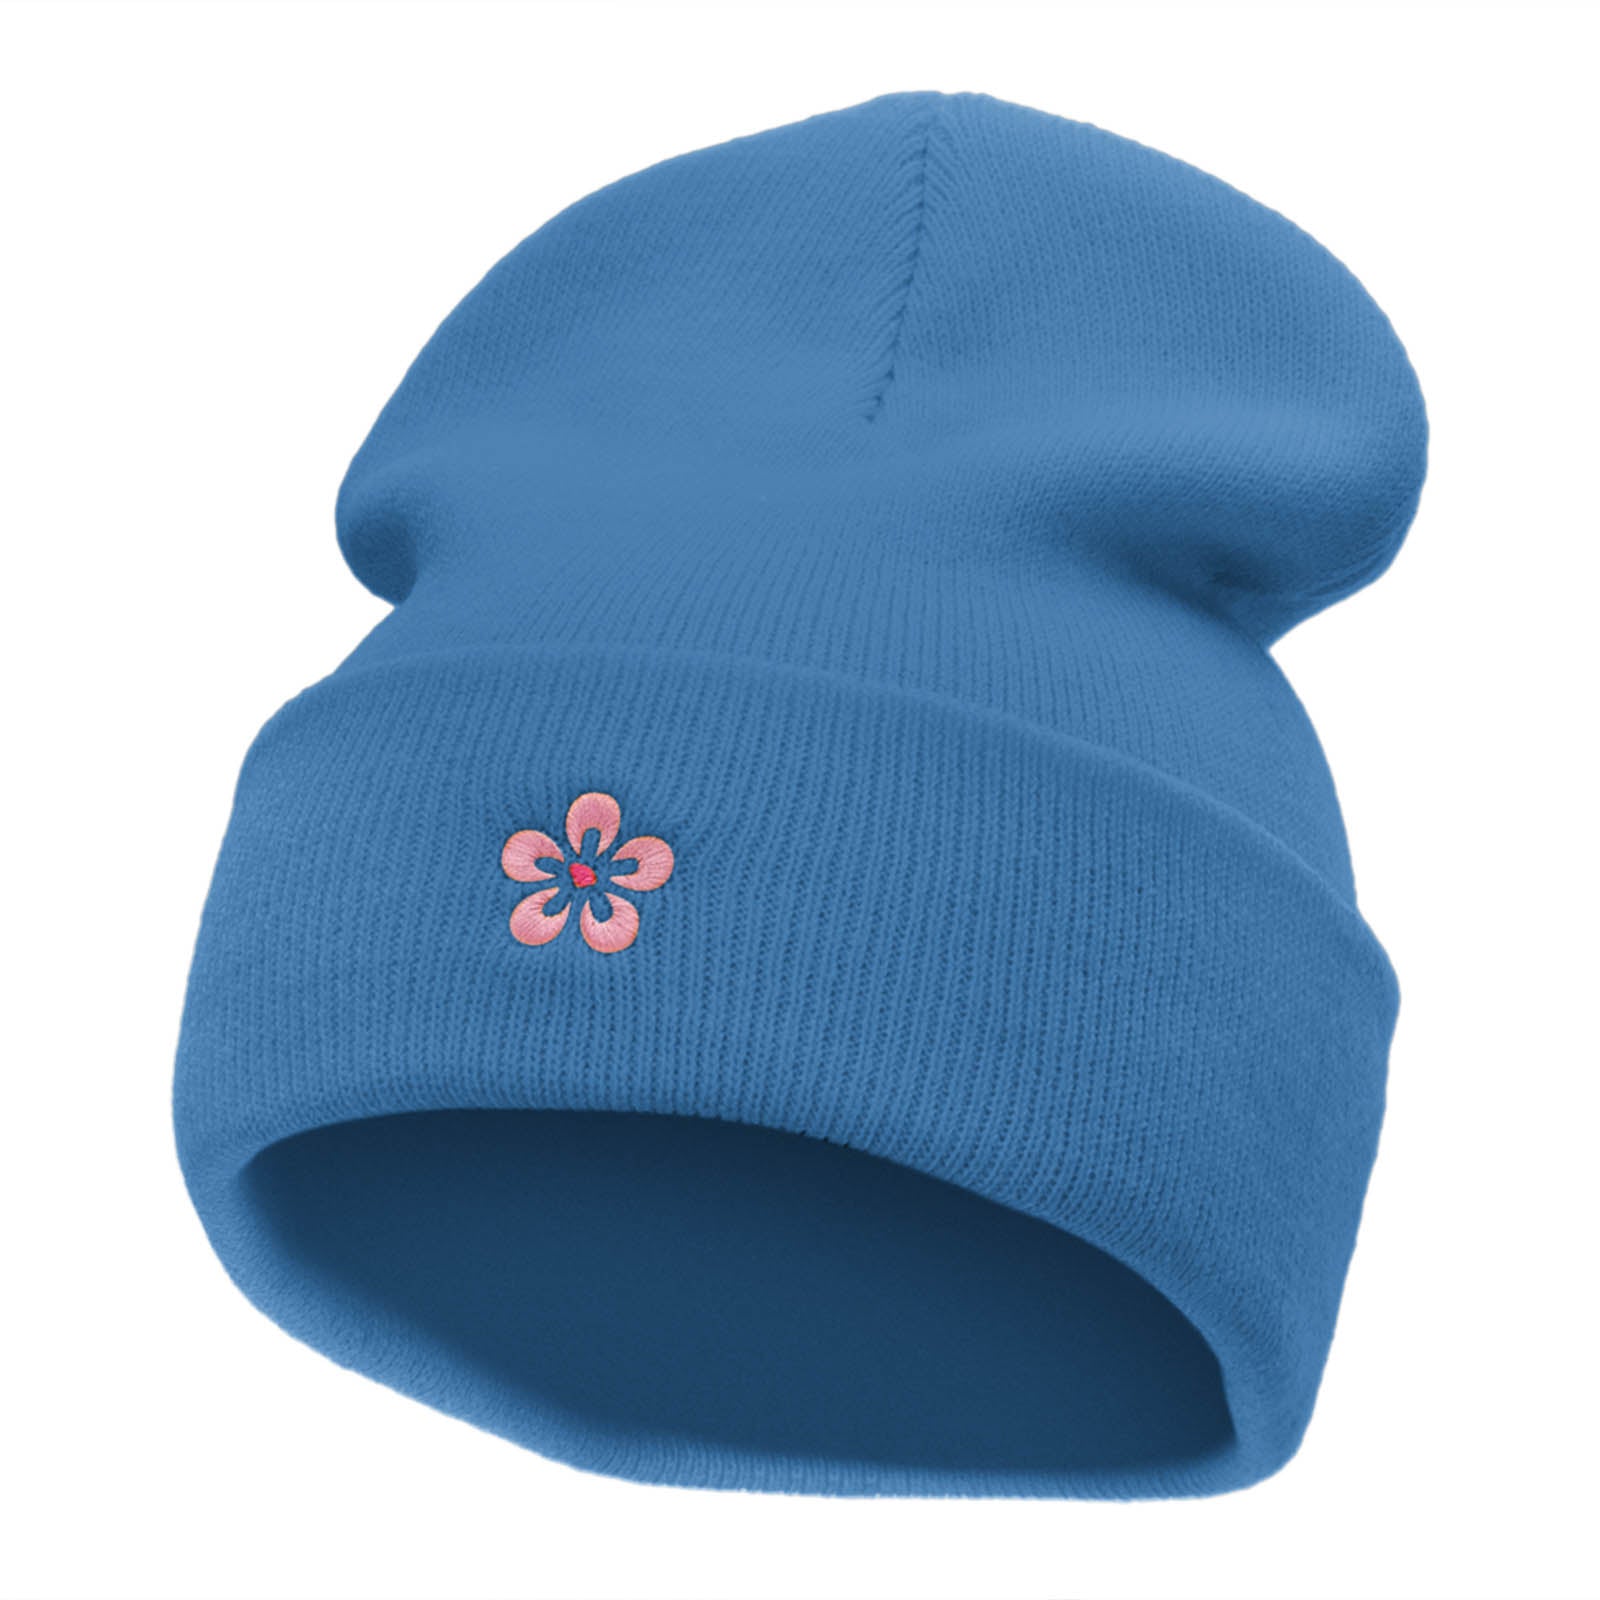 Japanese Cherry Blossom Embroidered 12 Inch Long Knitted Beanie - Sky Blue OSFM